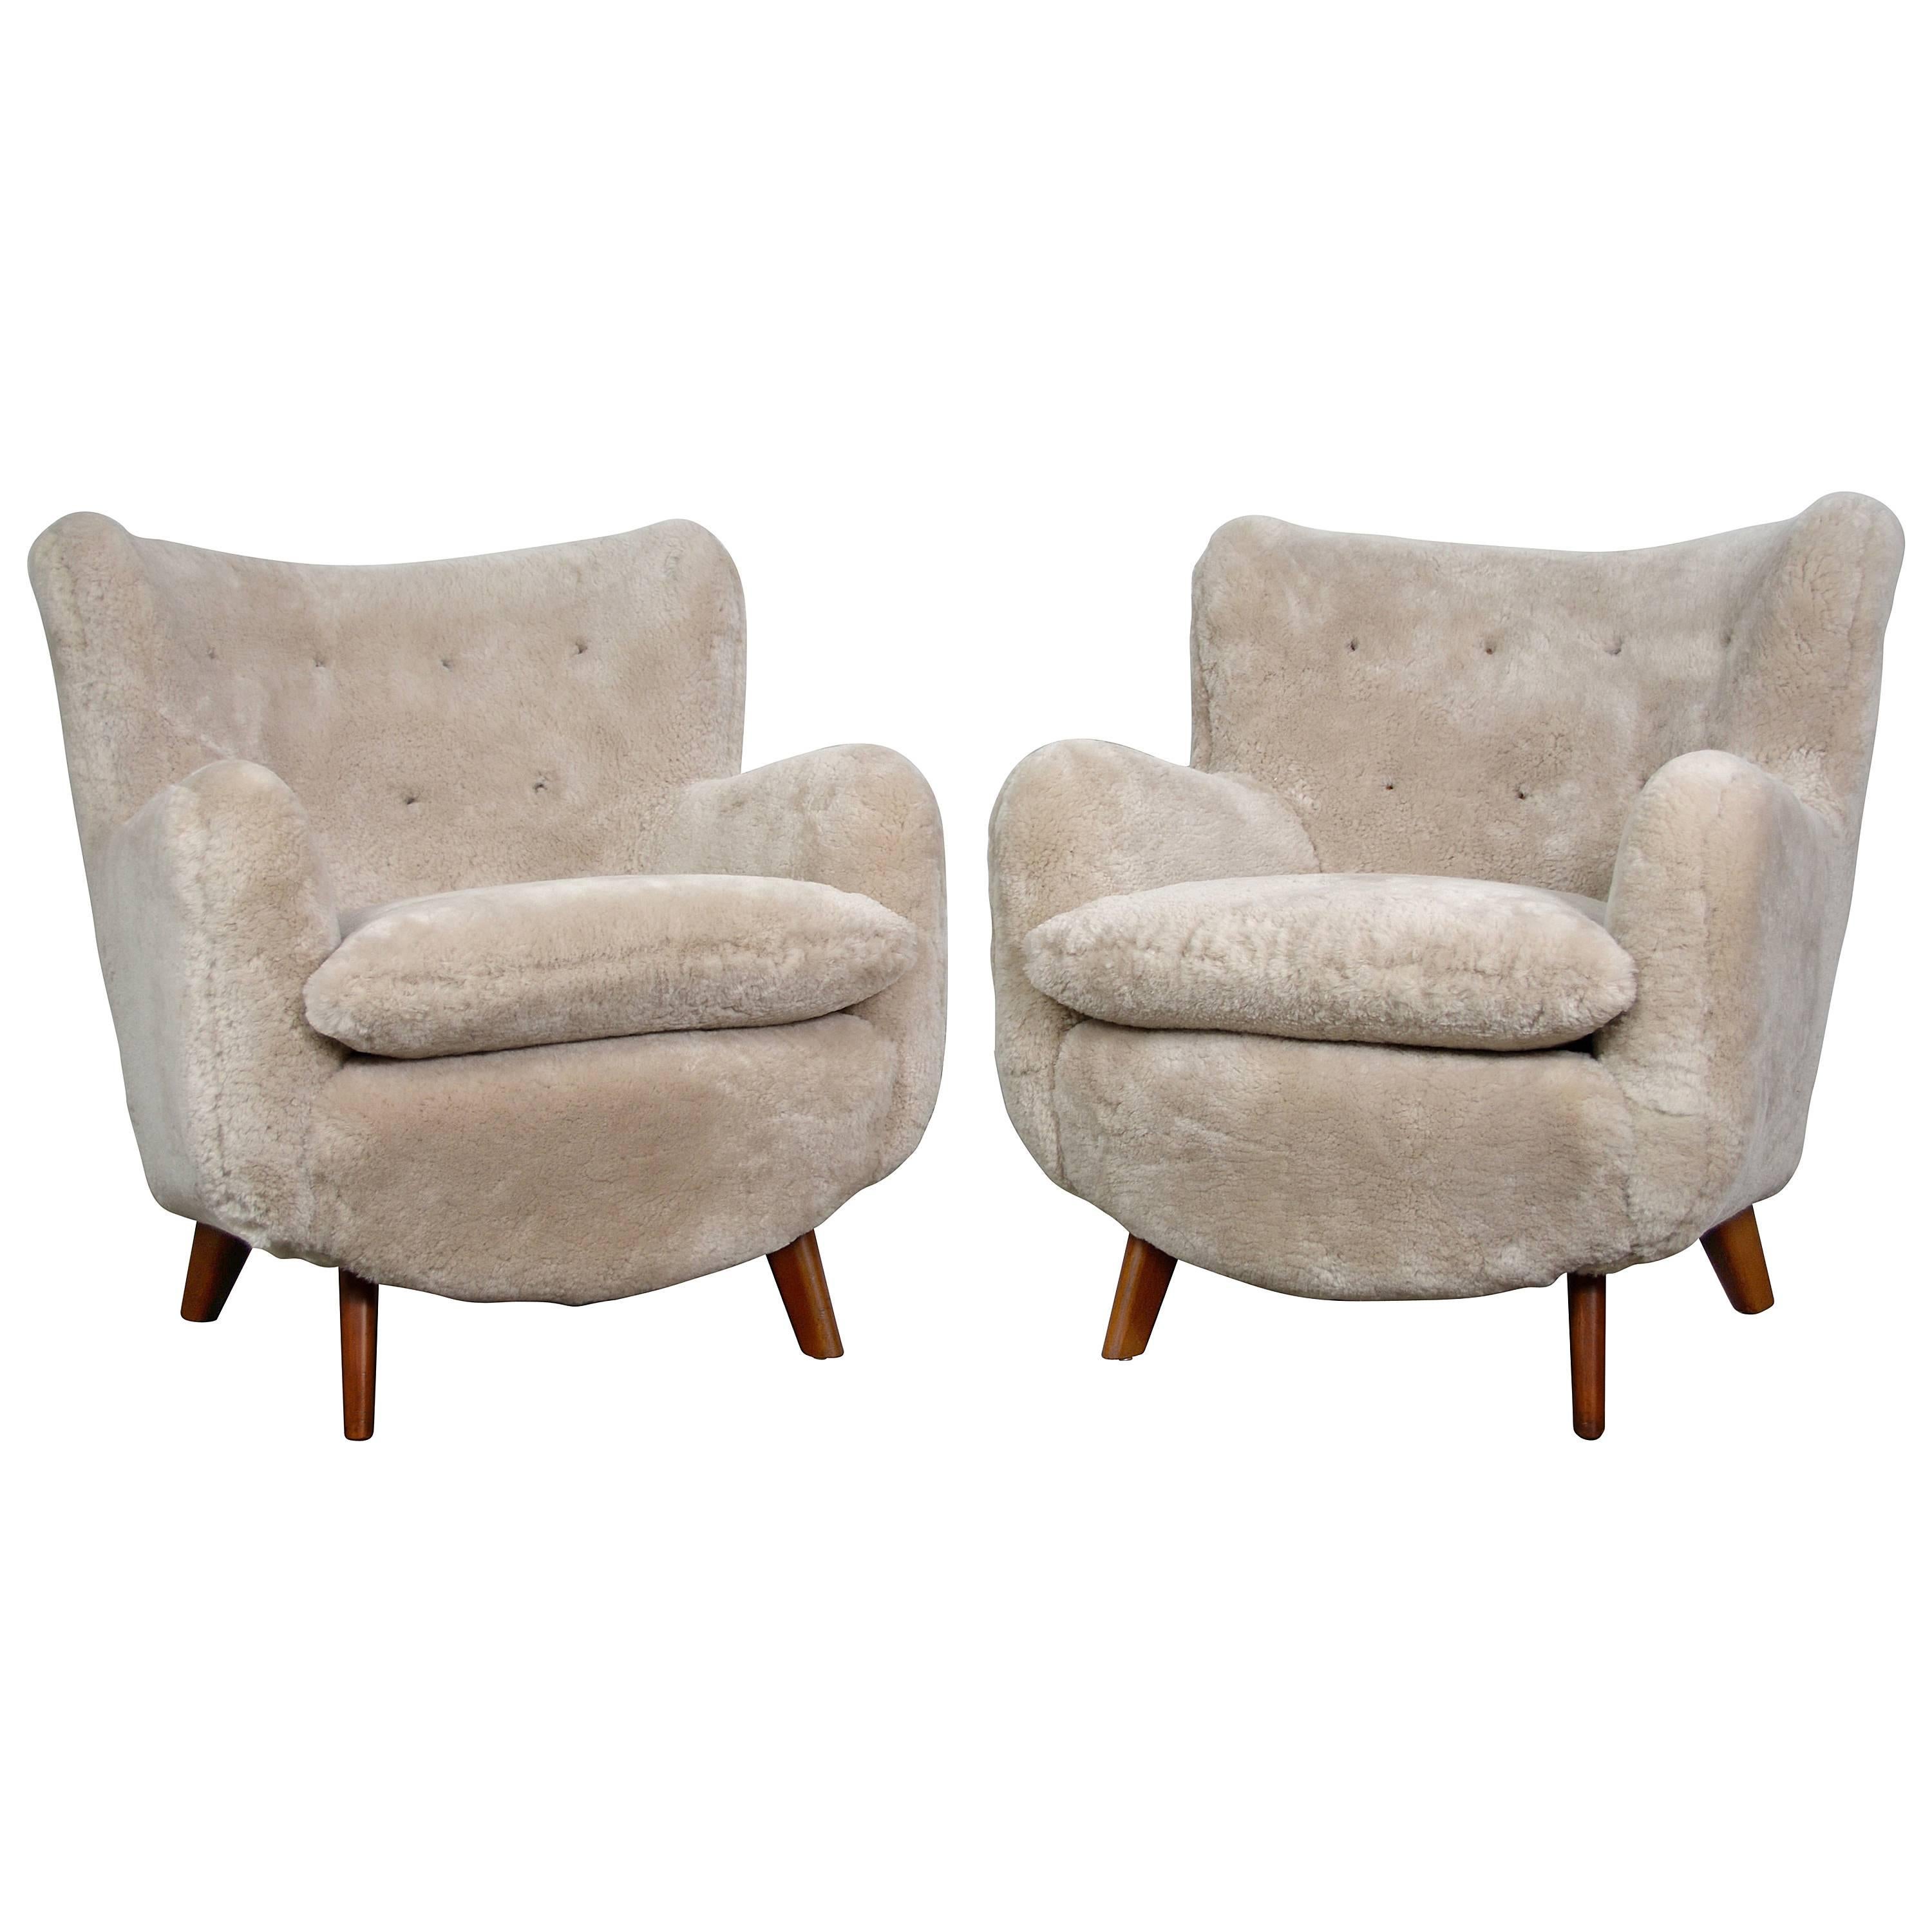 Early George Nelson Pair of Lounge Chairs in Sheepskin